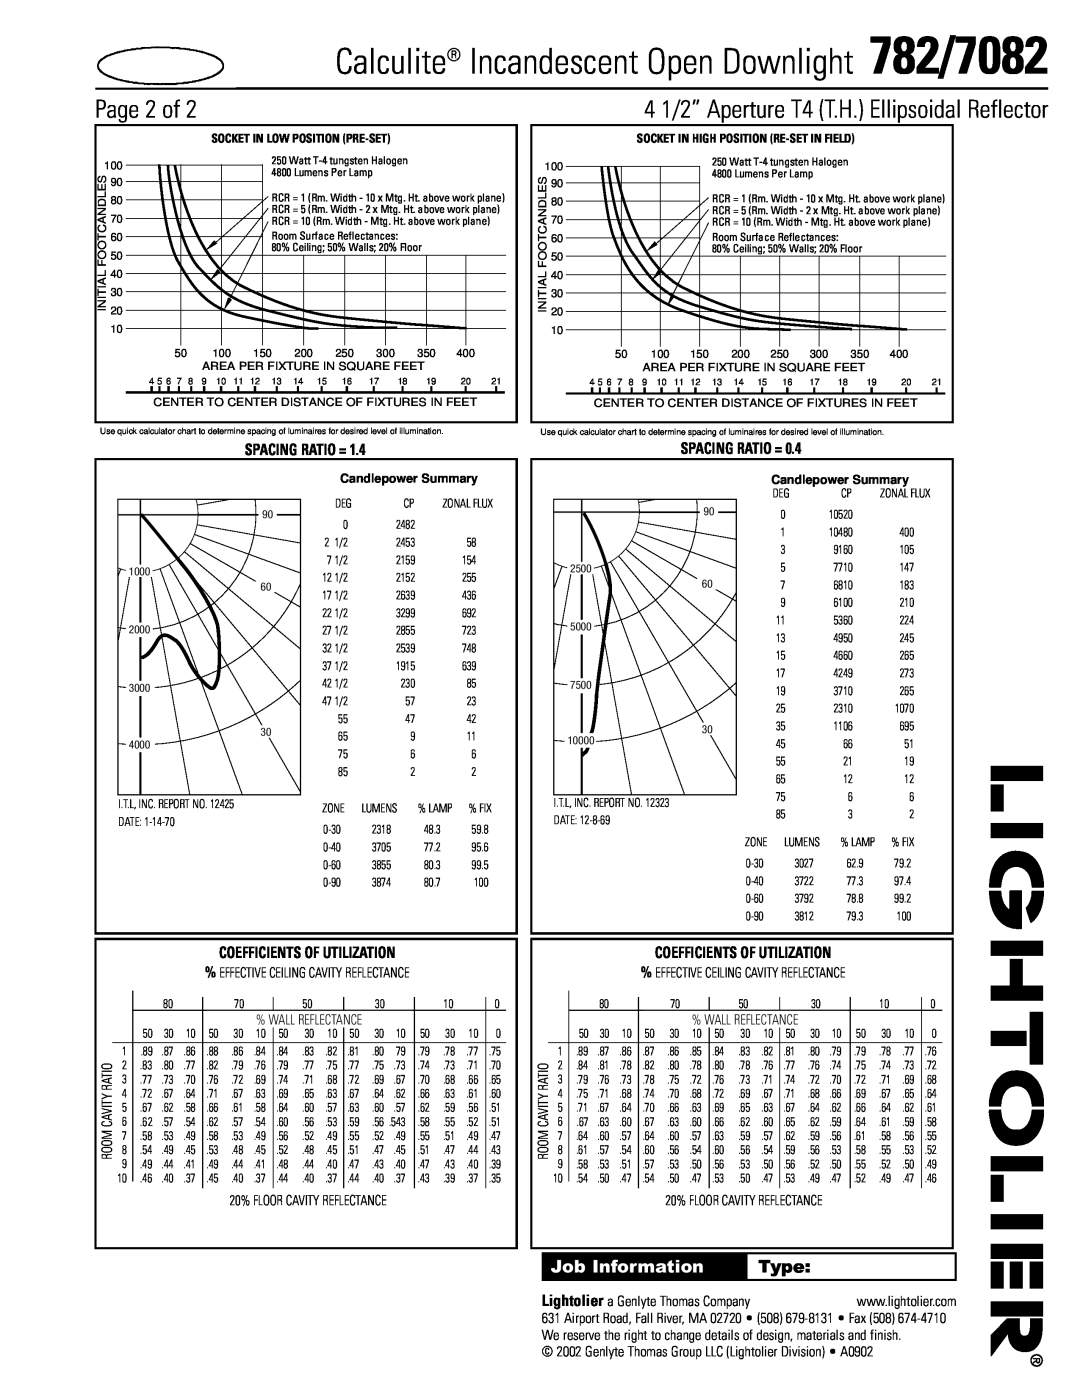 Lightolier Page 2 of, Calculite Incandescent Open Downlight 782/7082, 4 1/2” Aperture T4 T.H. Ellipsoidal Reflector 